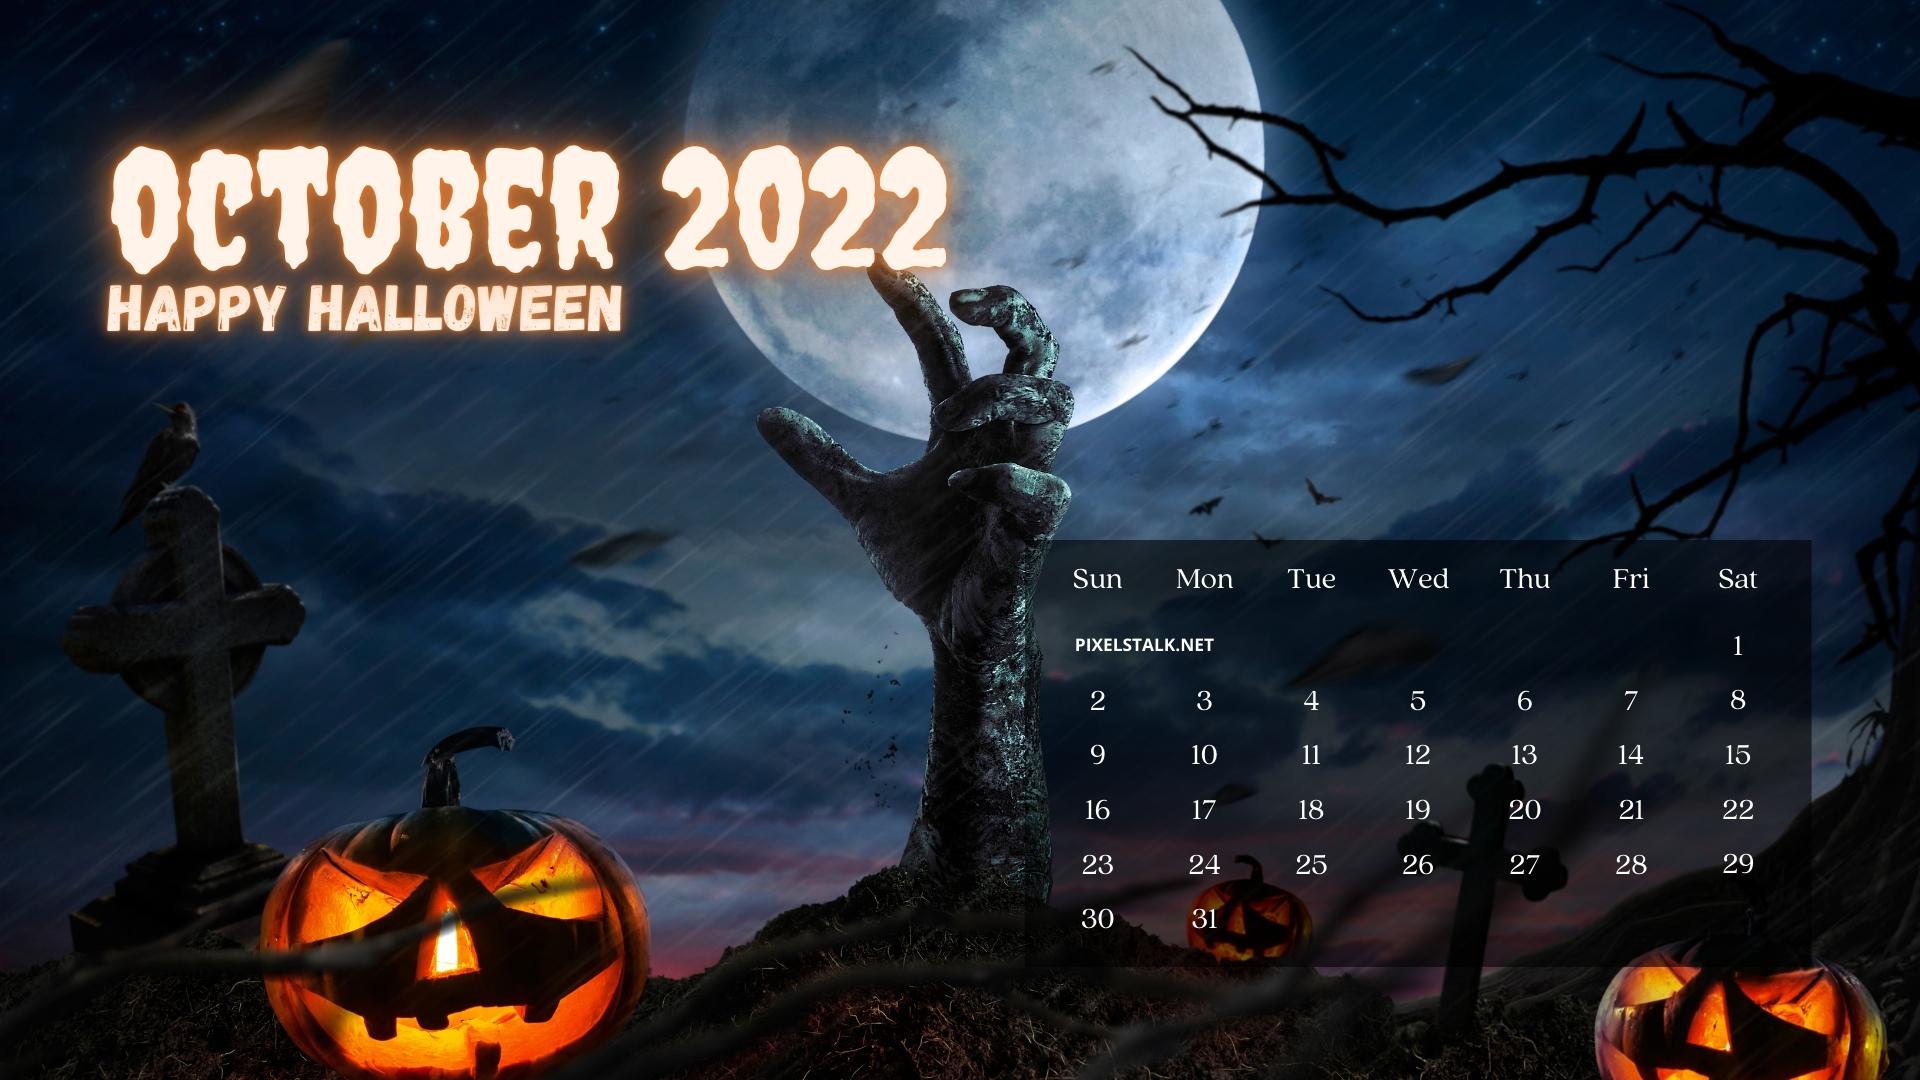 Halloween 2022 Date Significance and History